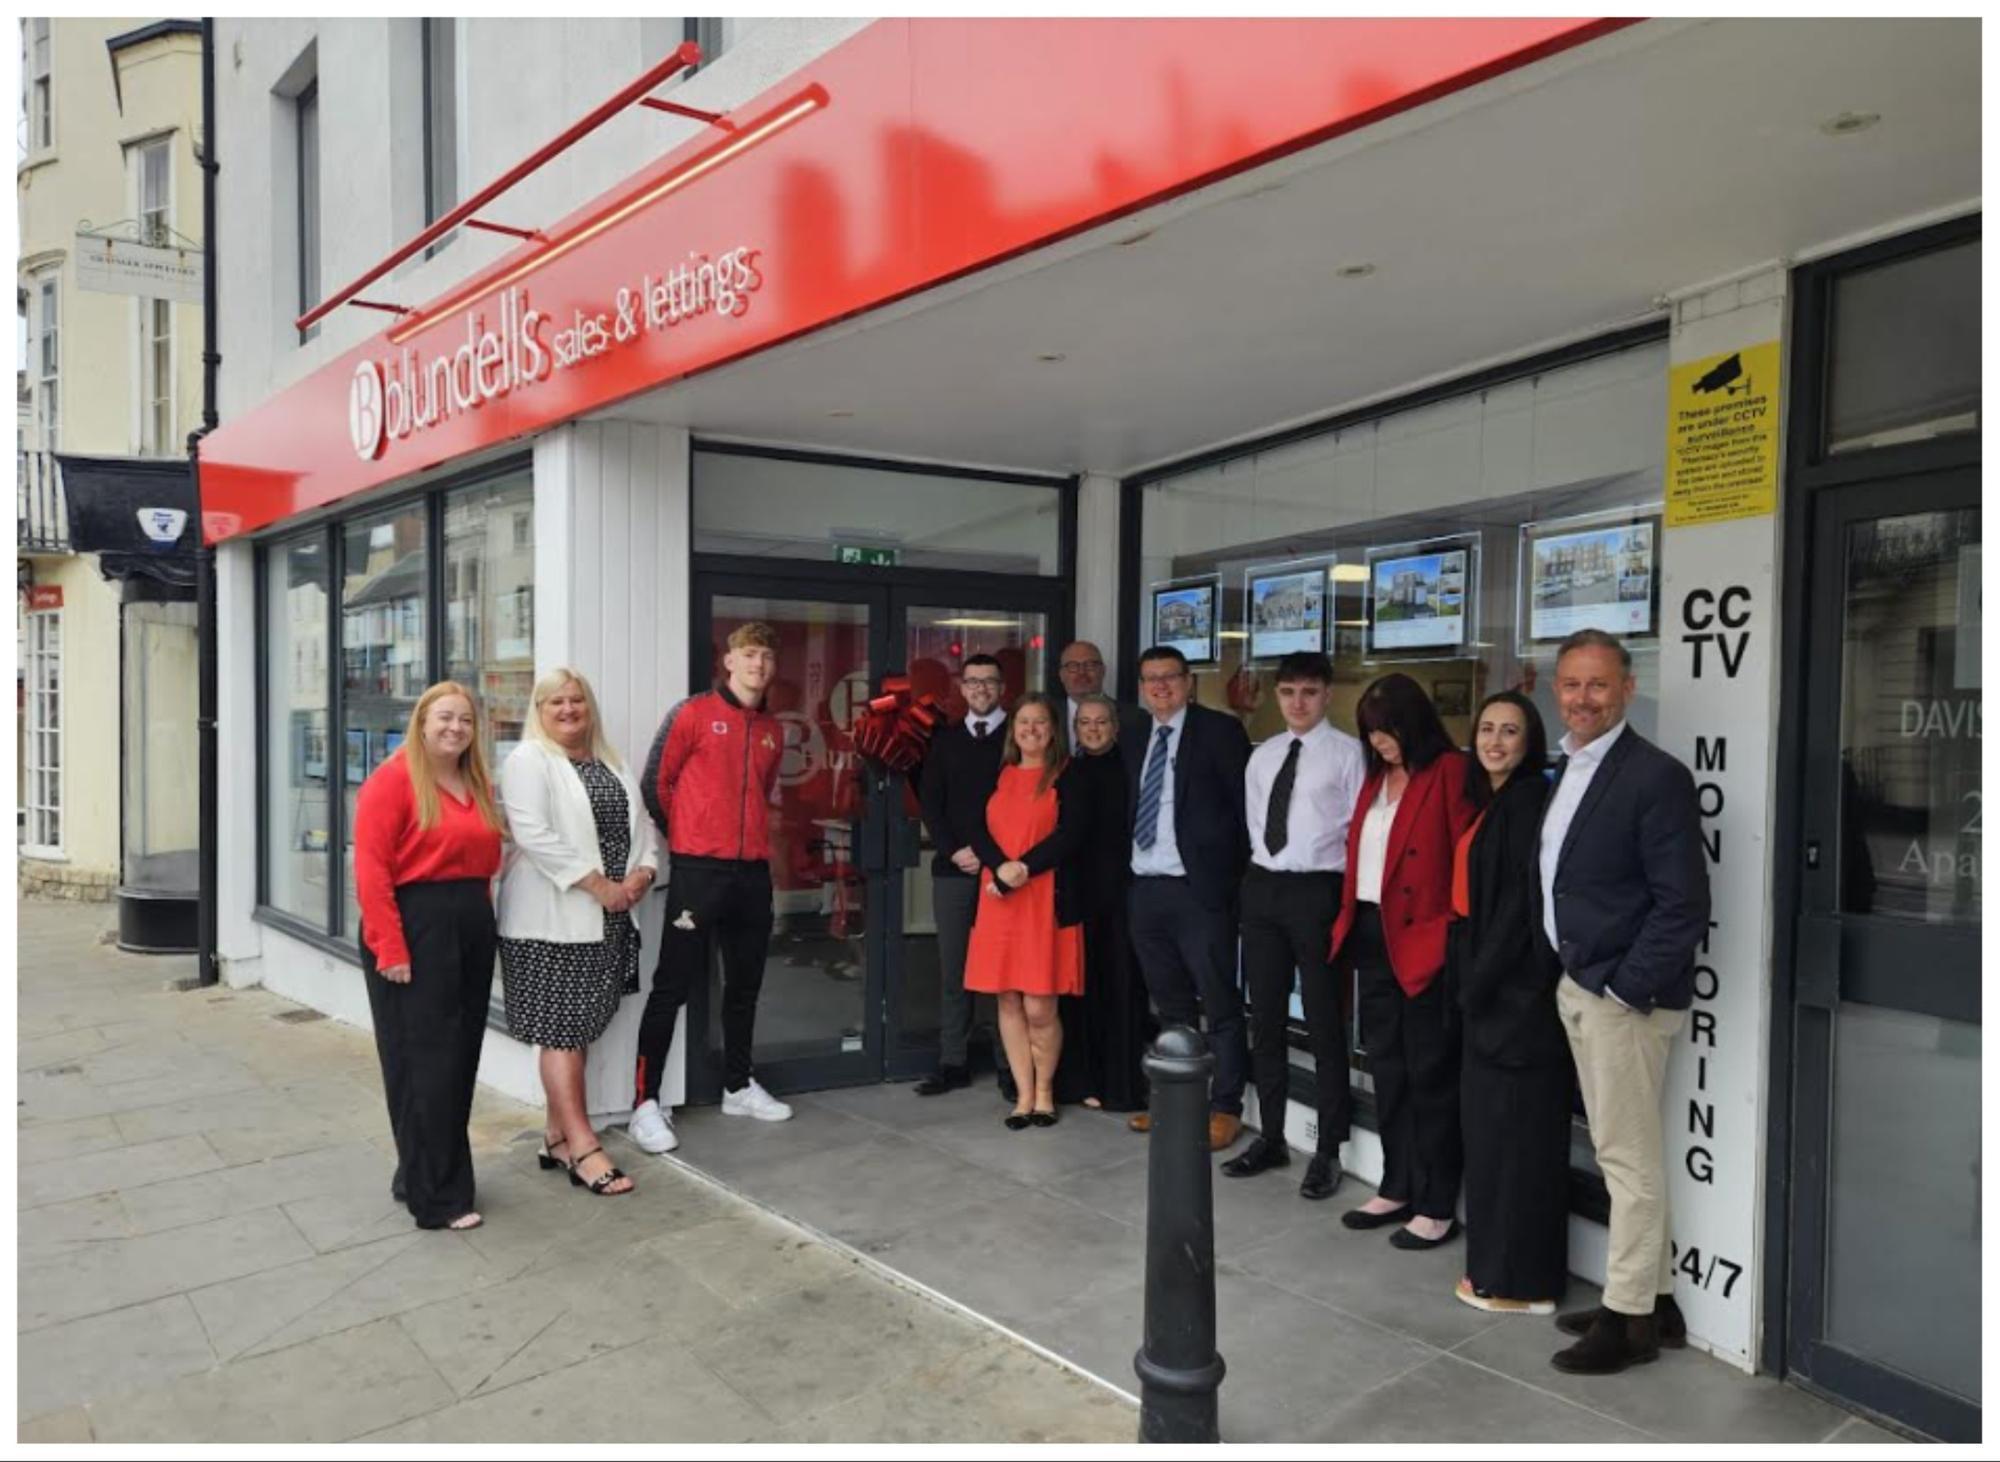 Doncaster Rovers ace opens new branch of Blundells estate agent in city centre